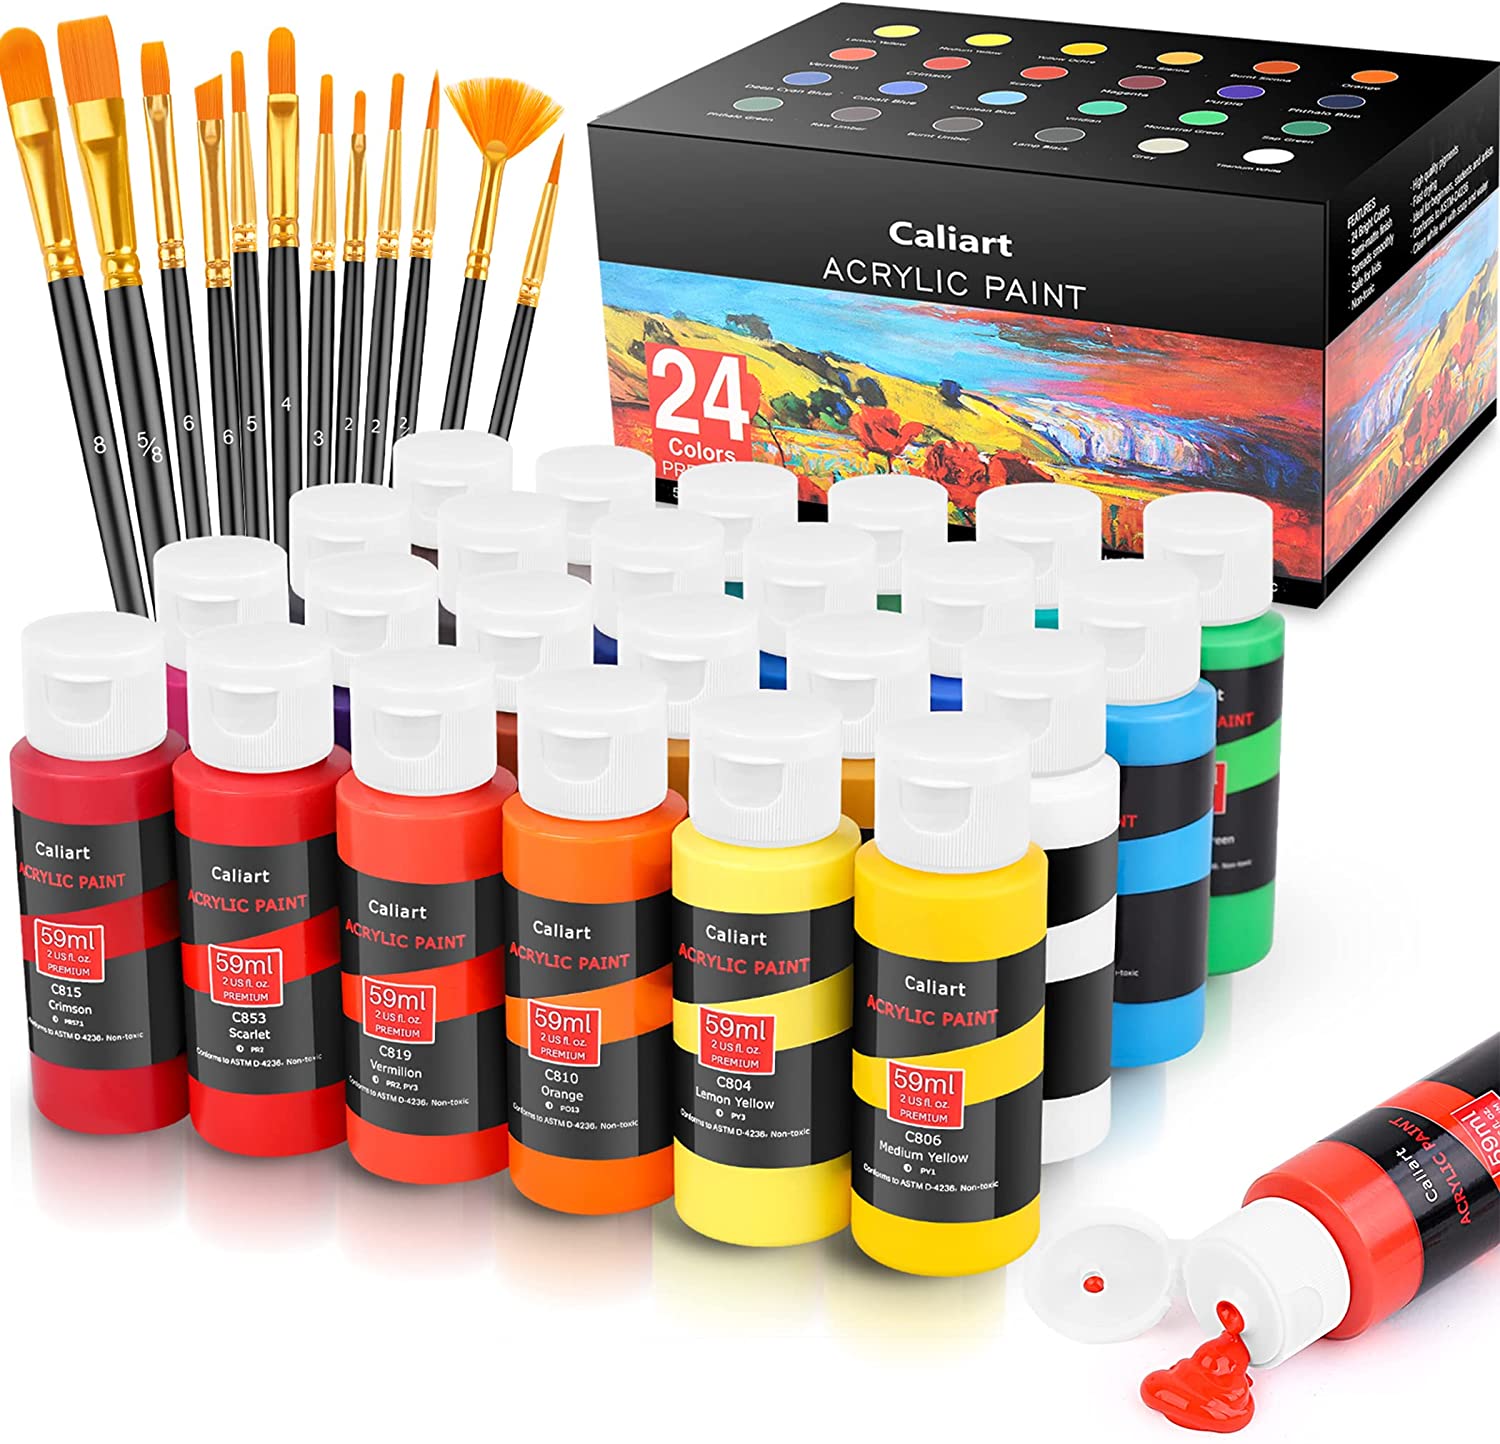 https://www.dontwasteyourmoney.com/wp-content/uploads/2021/12/caliart-brushes-acrylic-paint-craft-supplies-24-colors-craft-supplies.jpg